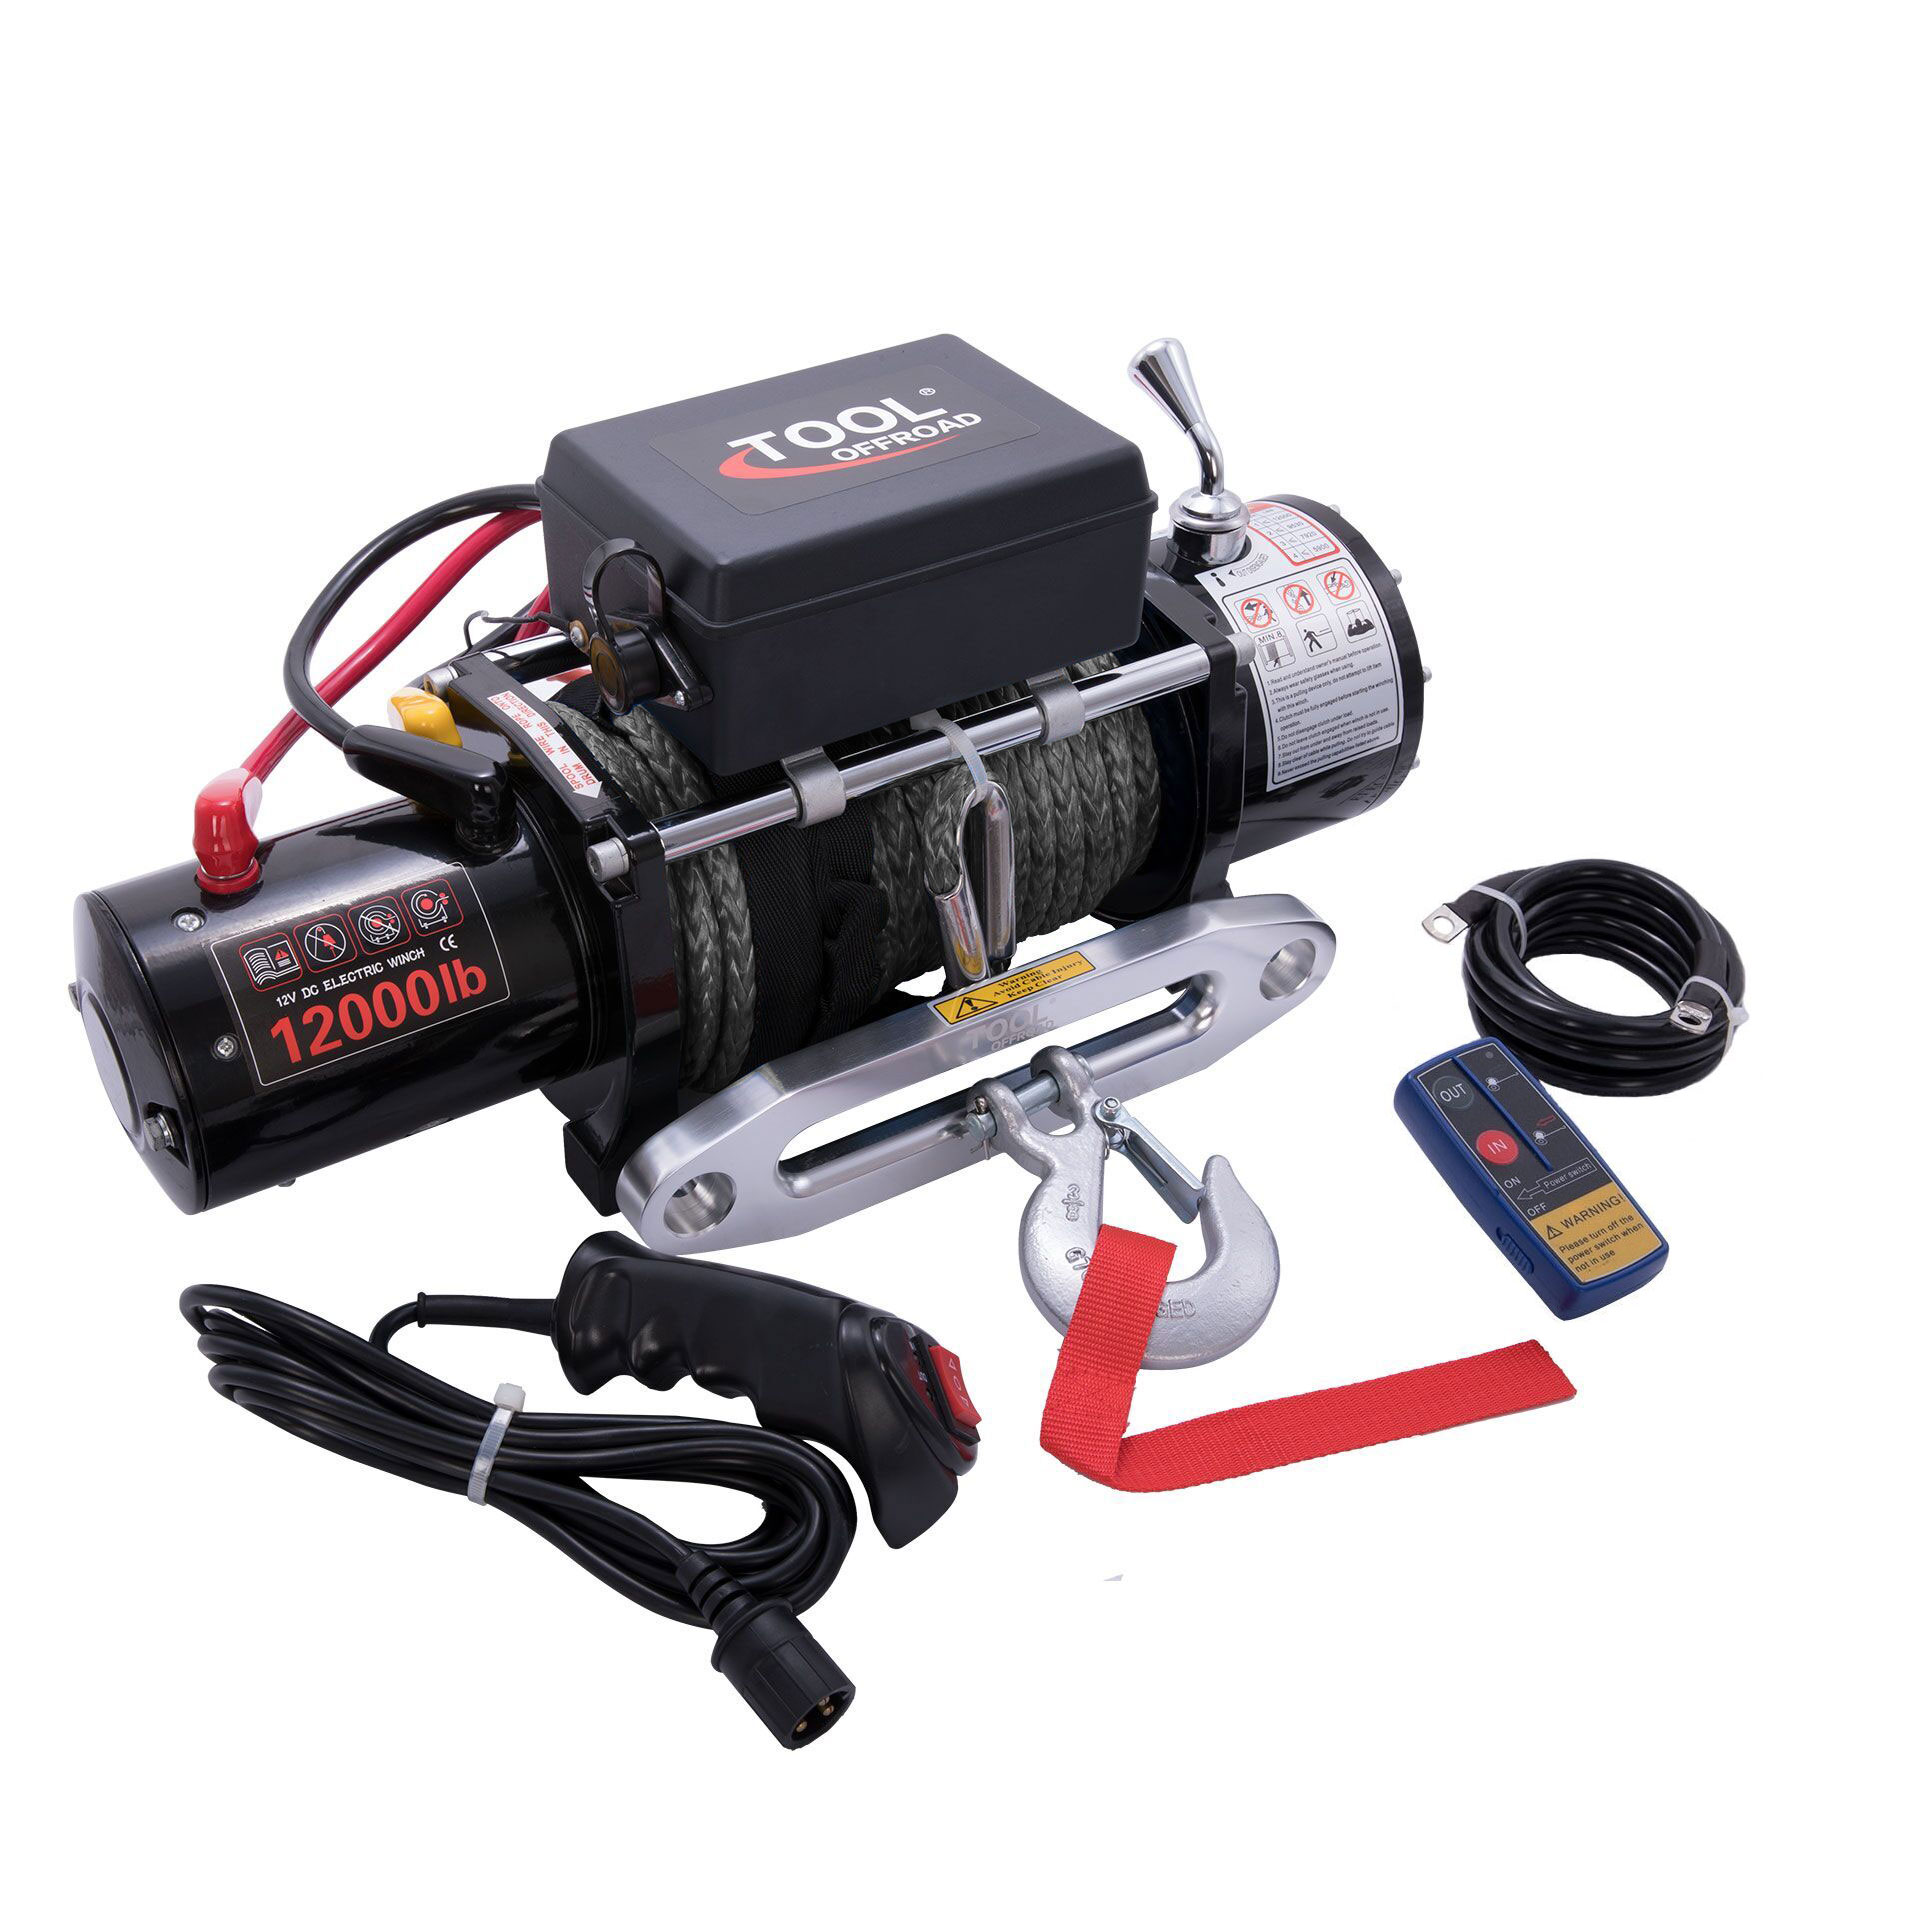  12000Lb Trailer Quiet Brake Car Electric Winch Synthetic Rope 12V Permanent Magnet Motor